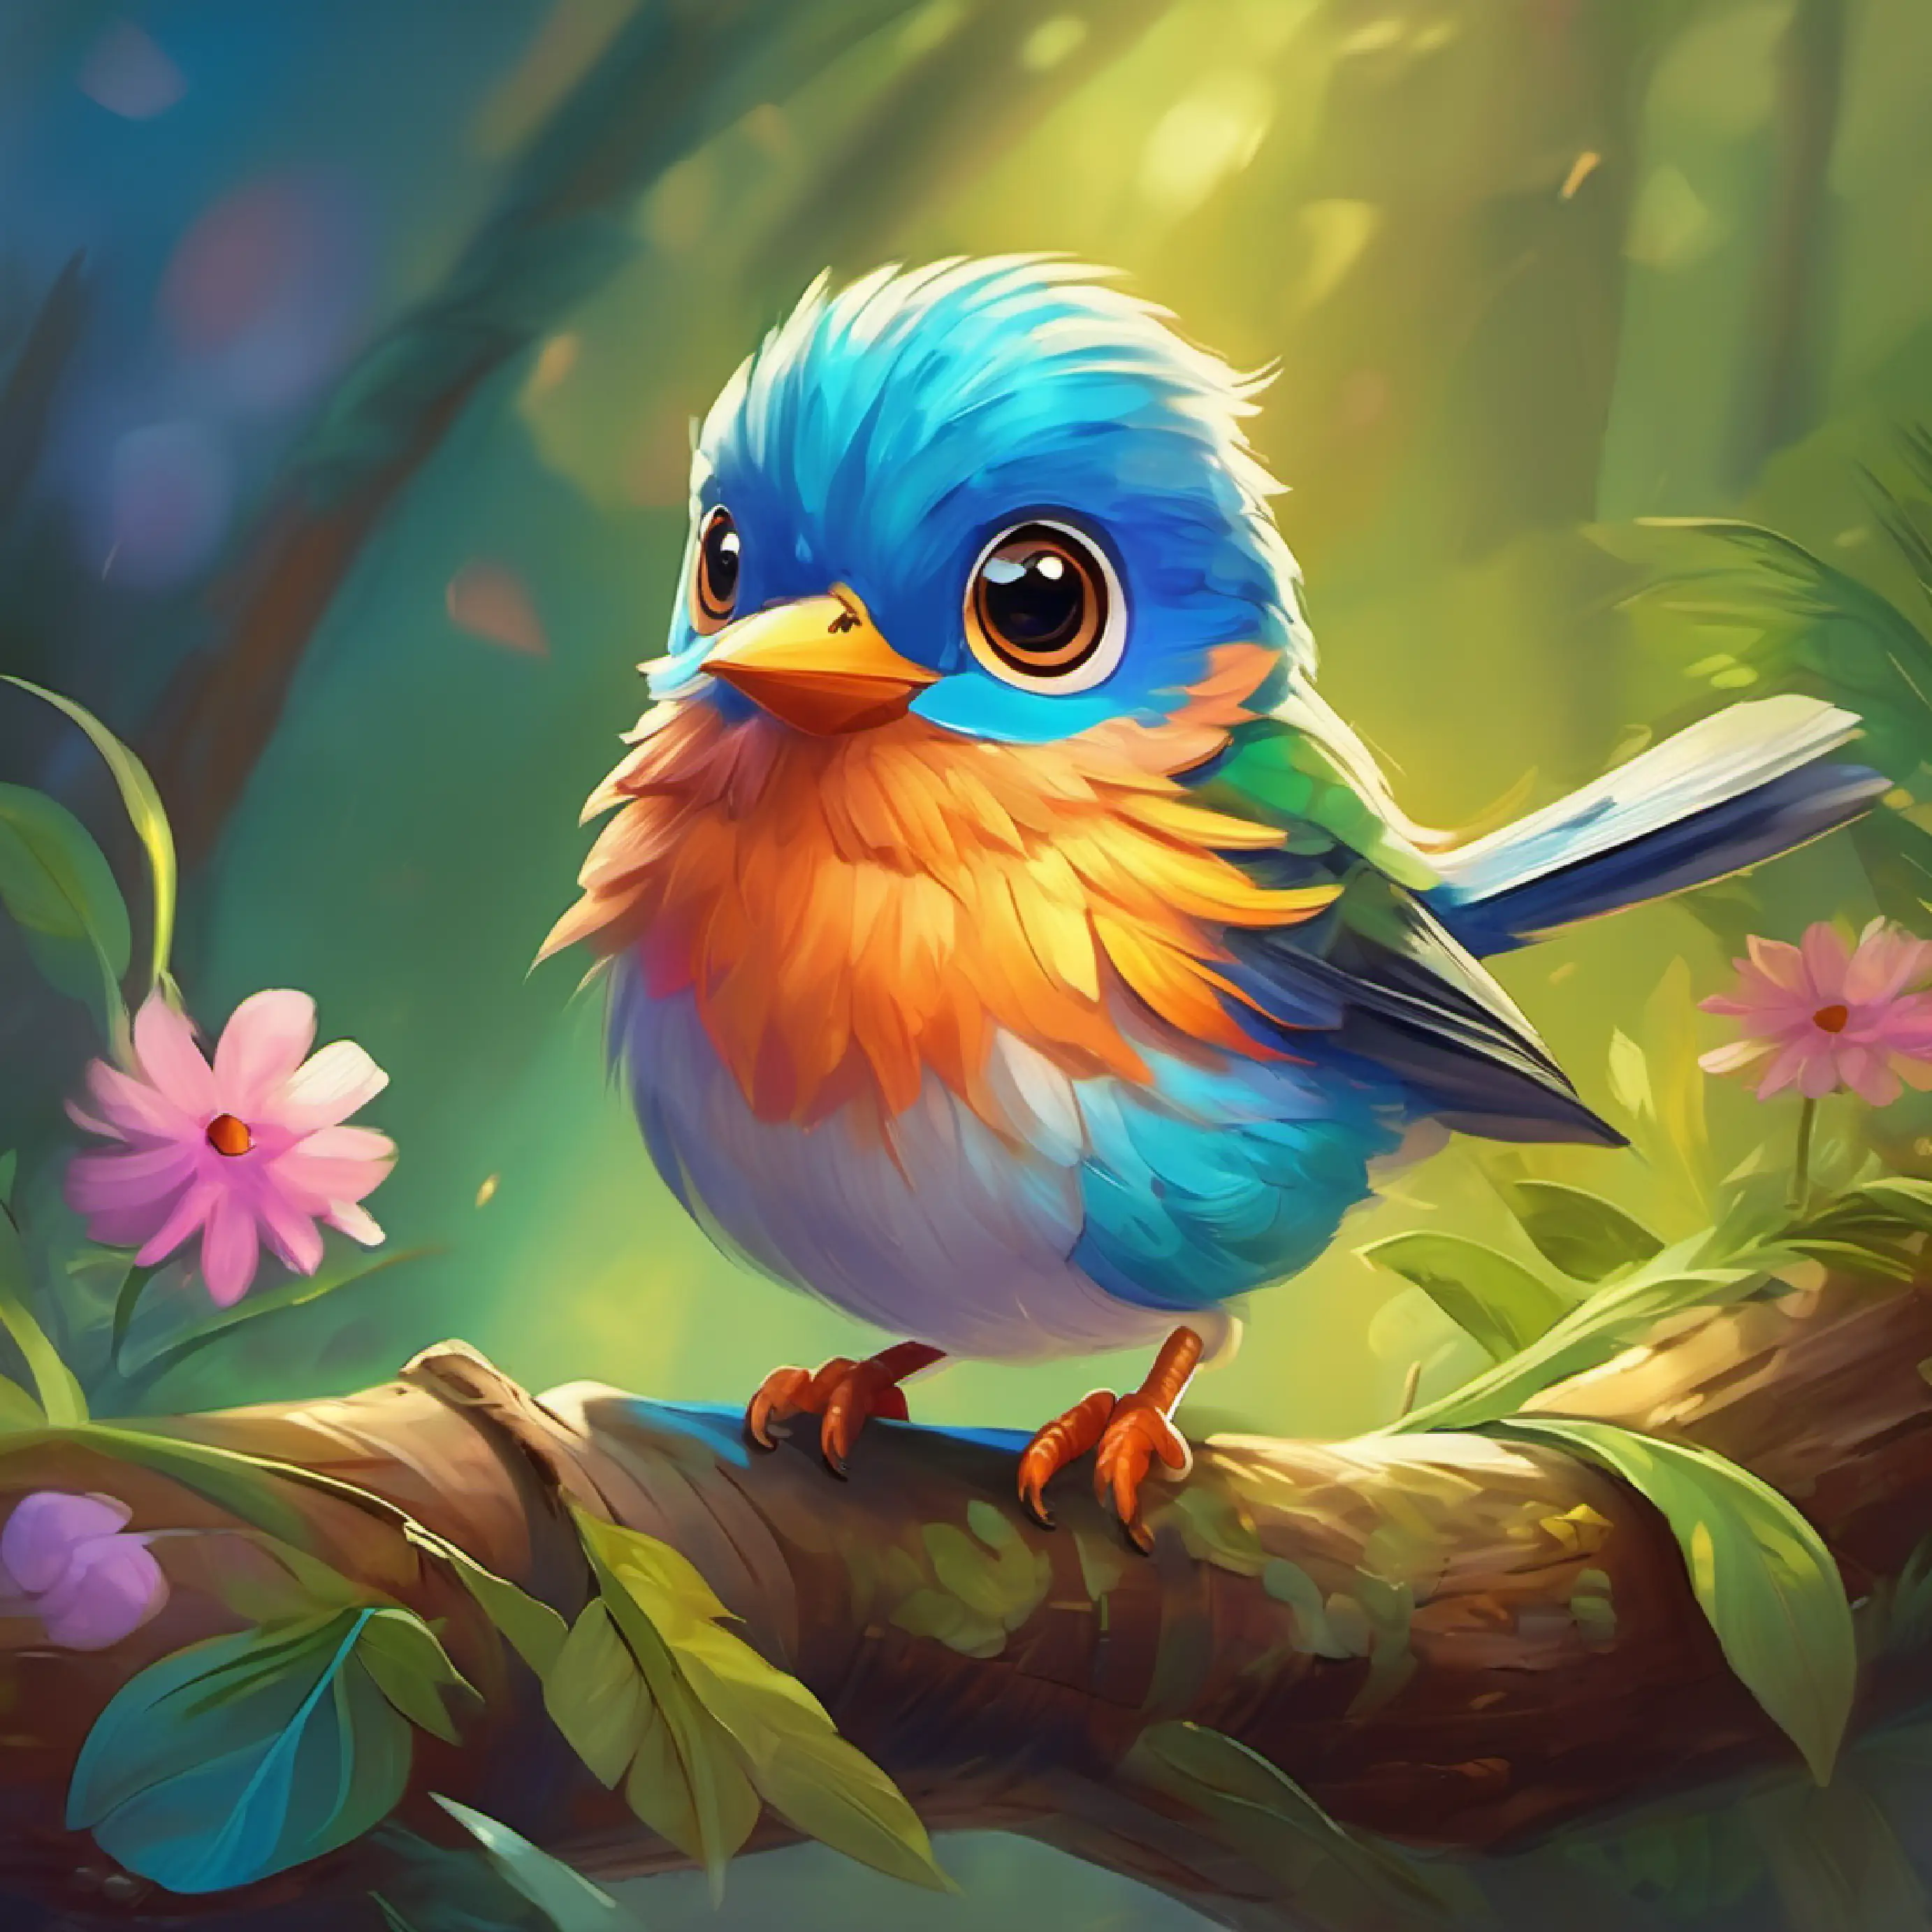 A small cheerful bird with bright feathers and curious eyes offers friendship, suggests sharing an adventure.